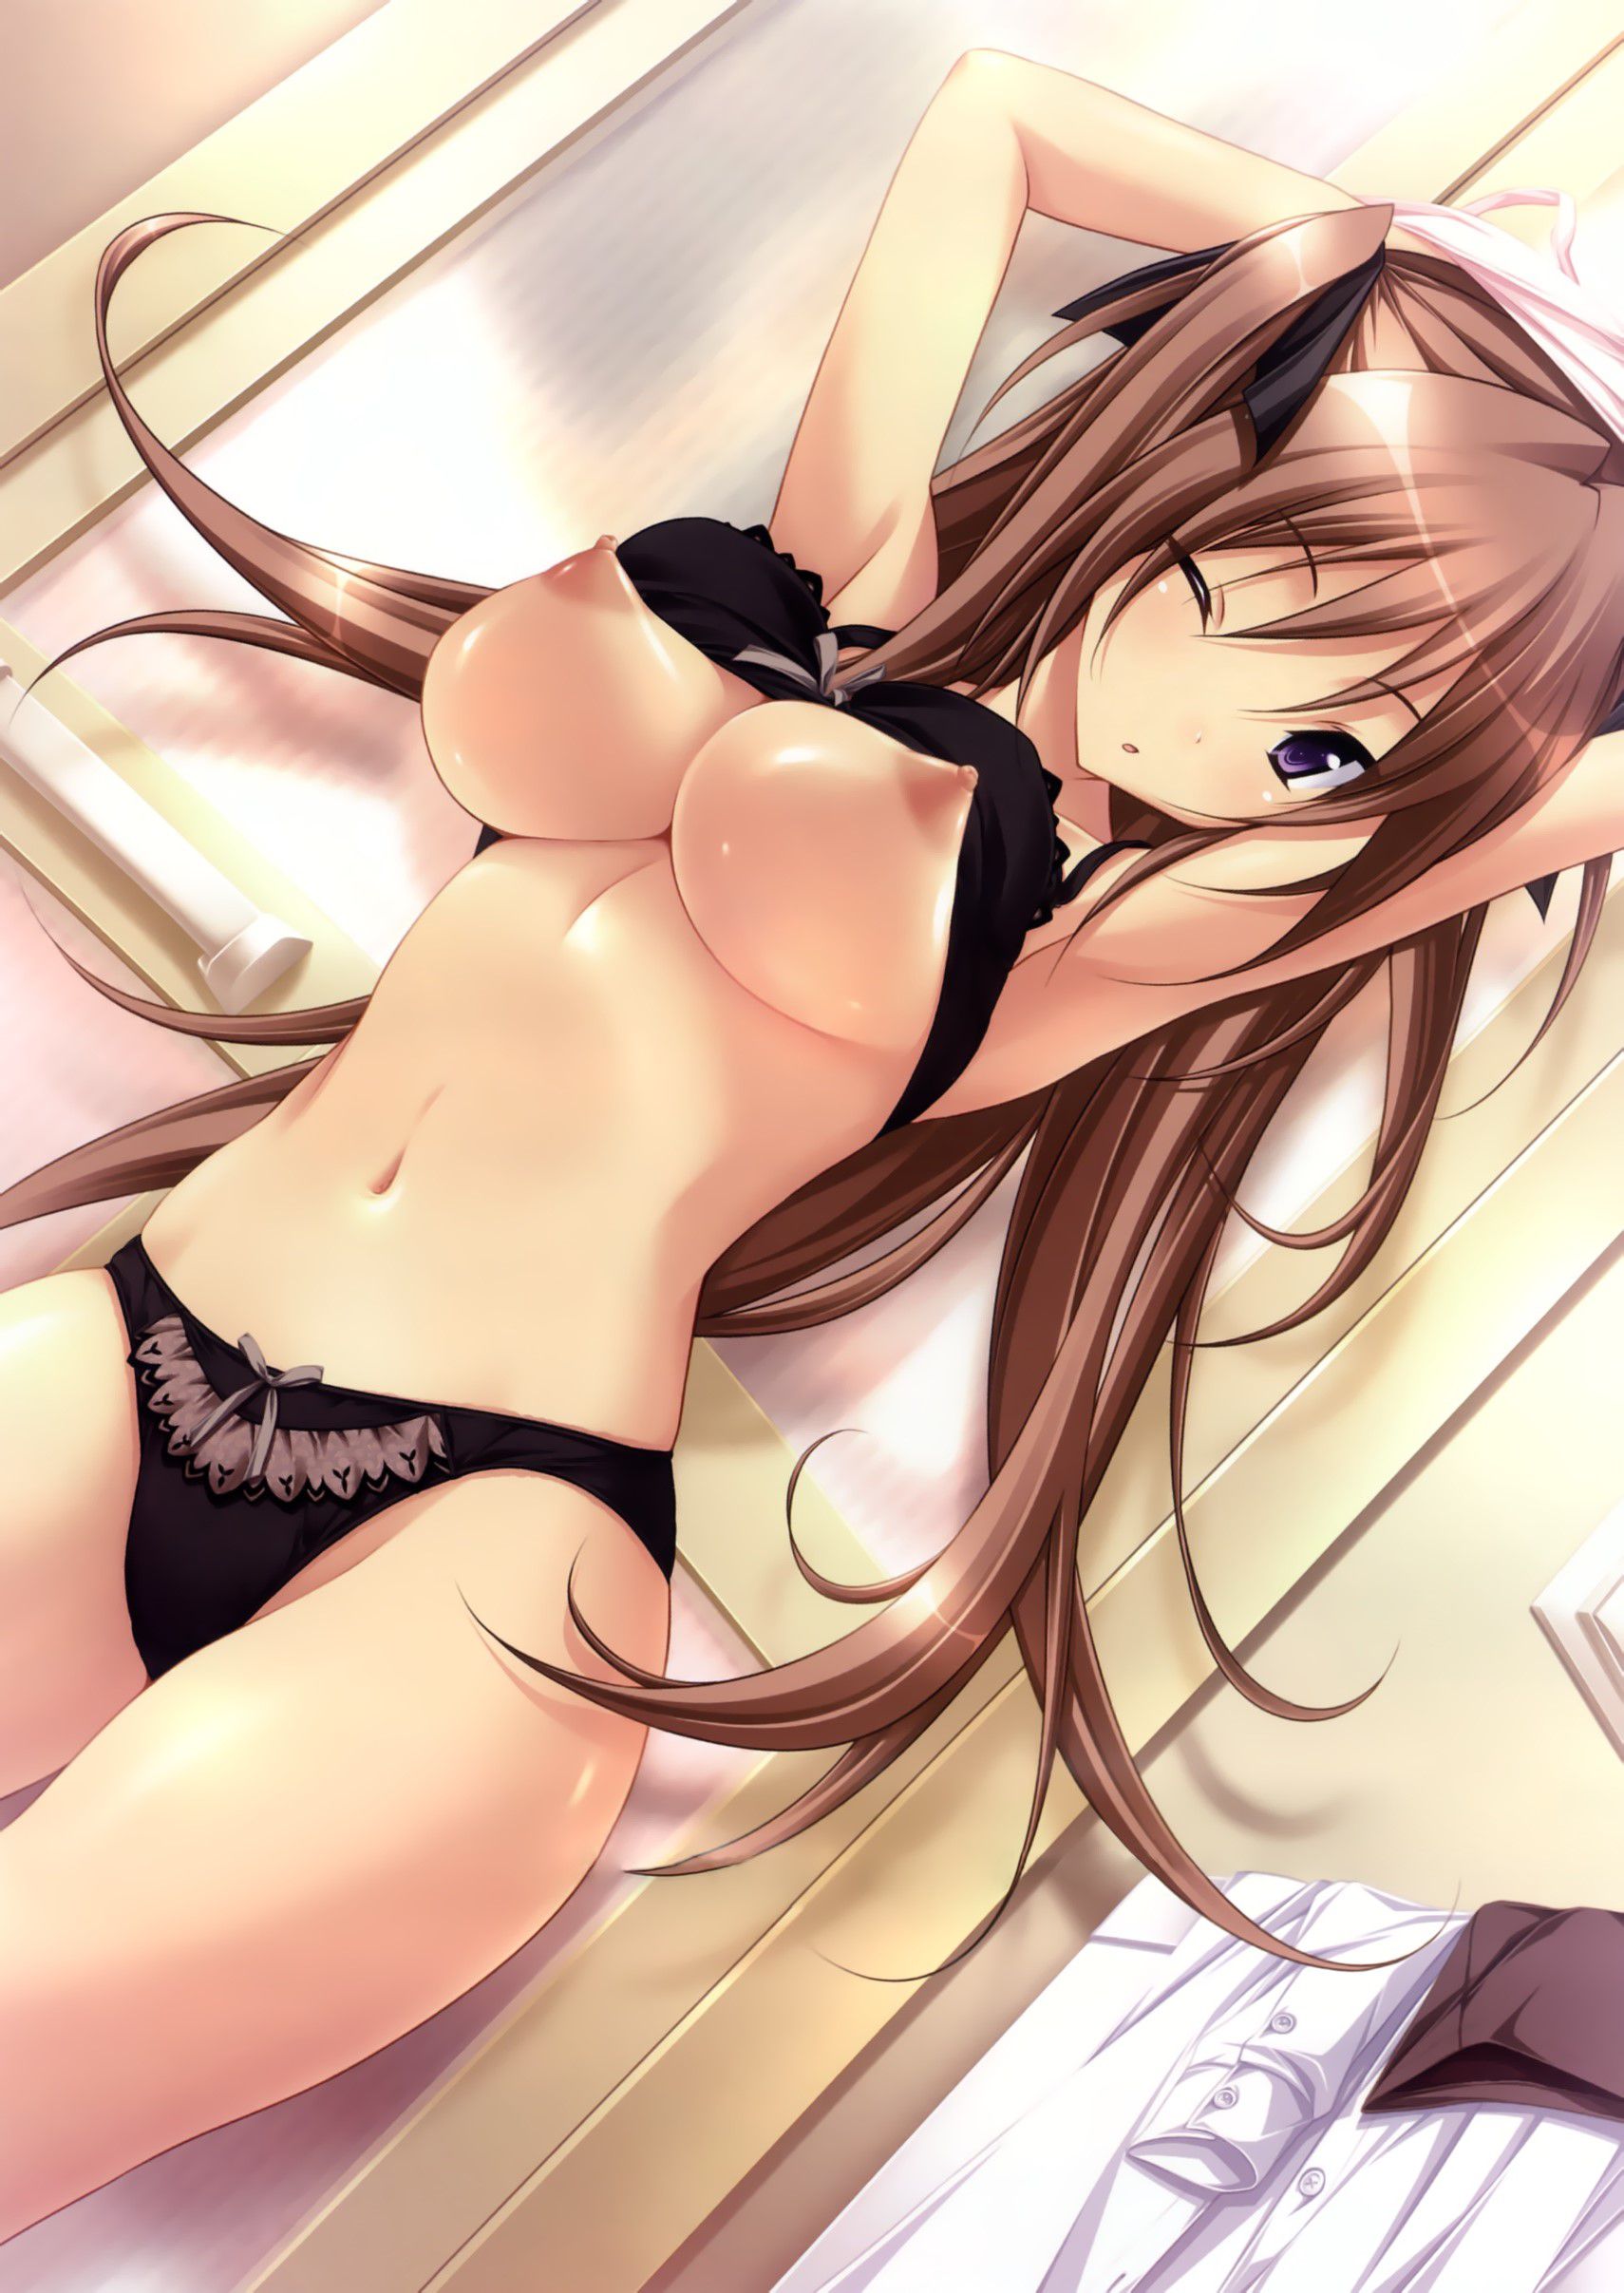 Future nostalgia [18 eroge CG] wallpapers and pictures 5 11